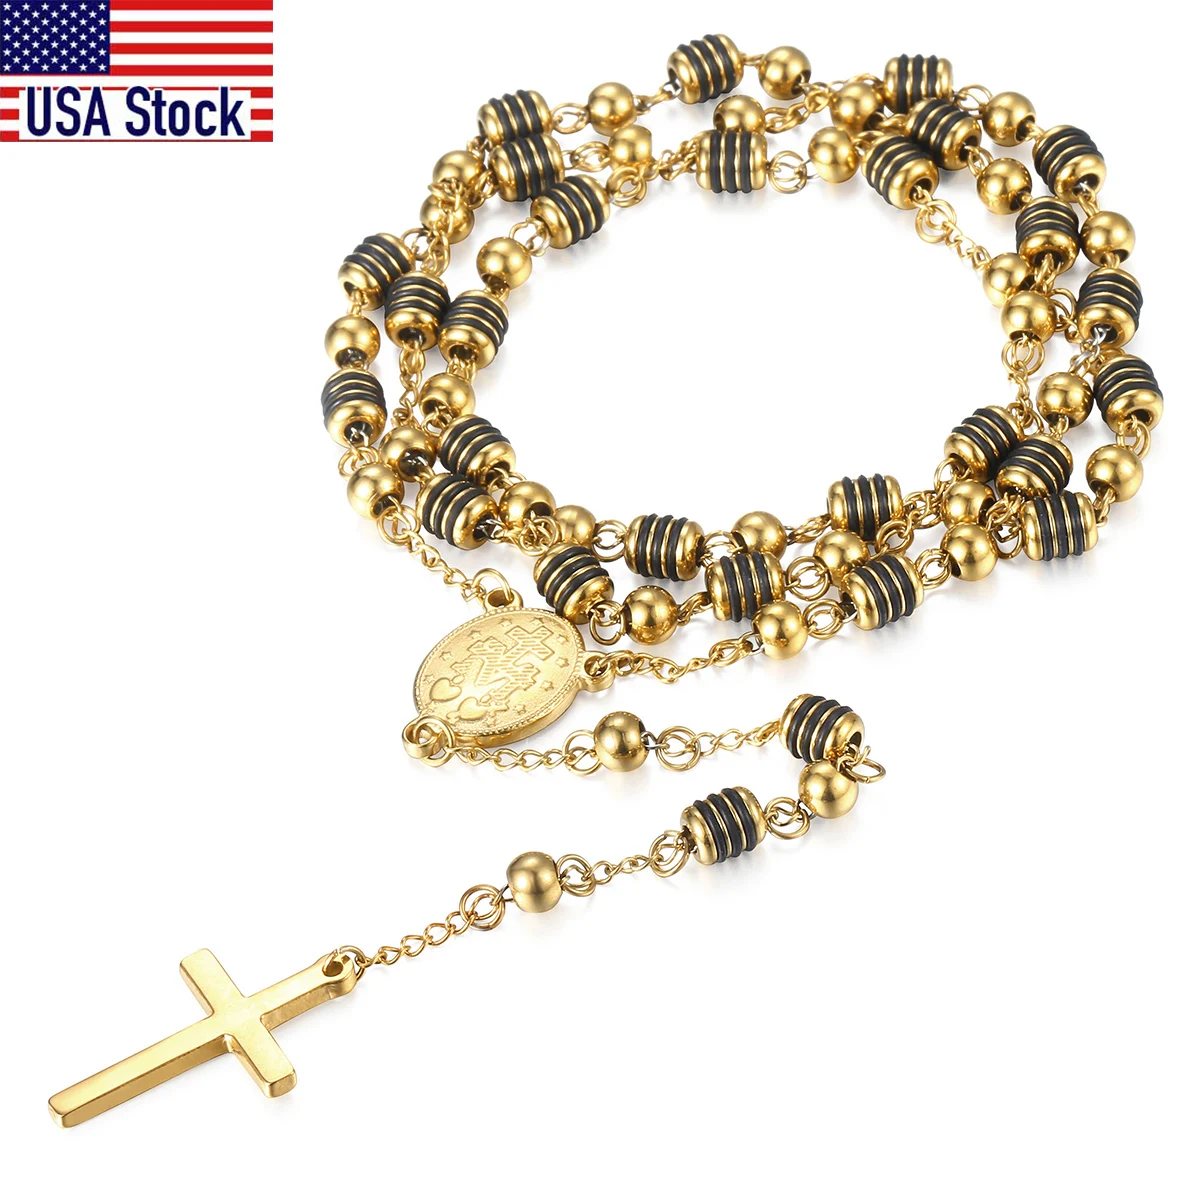 6mm Rosary Jesus Christ Cross Pendant Necklace Gold Tone Black Tone Stainless Steel Bead Long Chain Women Men Fashion Jewelry